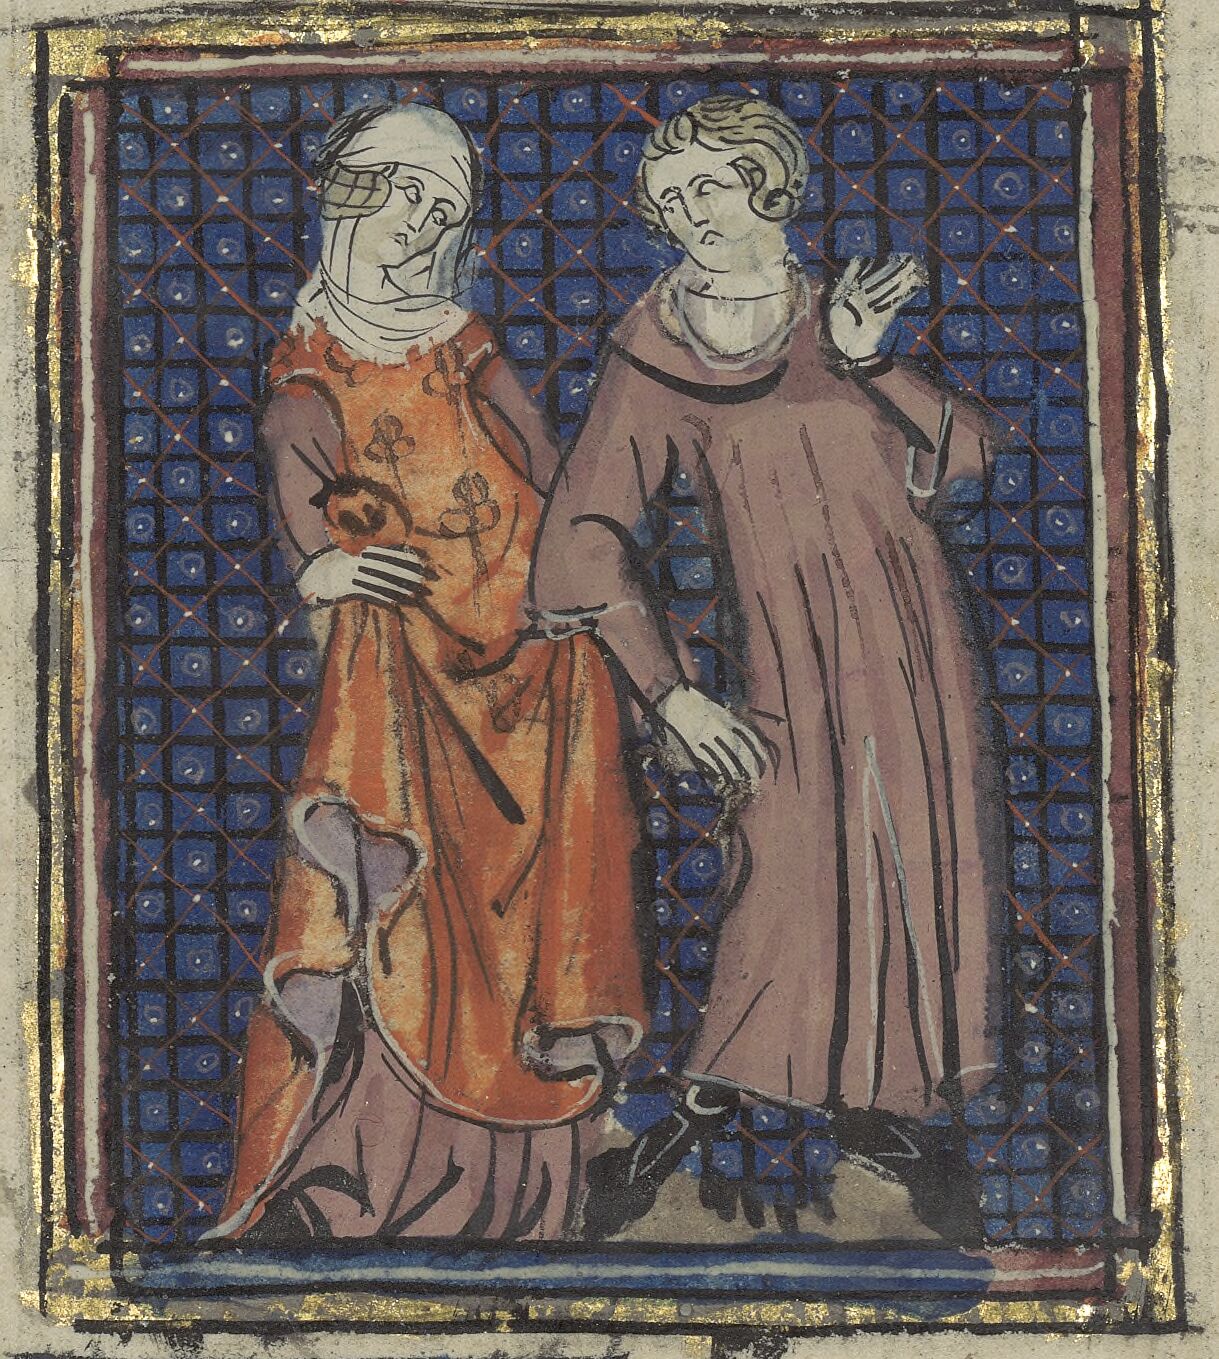 Close up of an illustration of two individuals, View 139 - Folio 68r of the manuscript